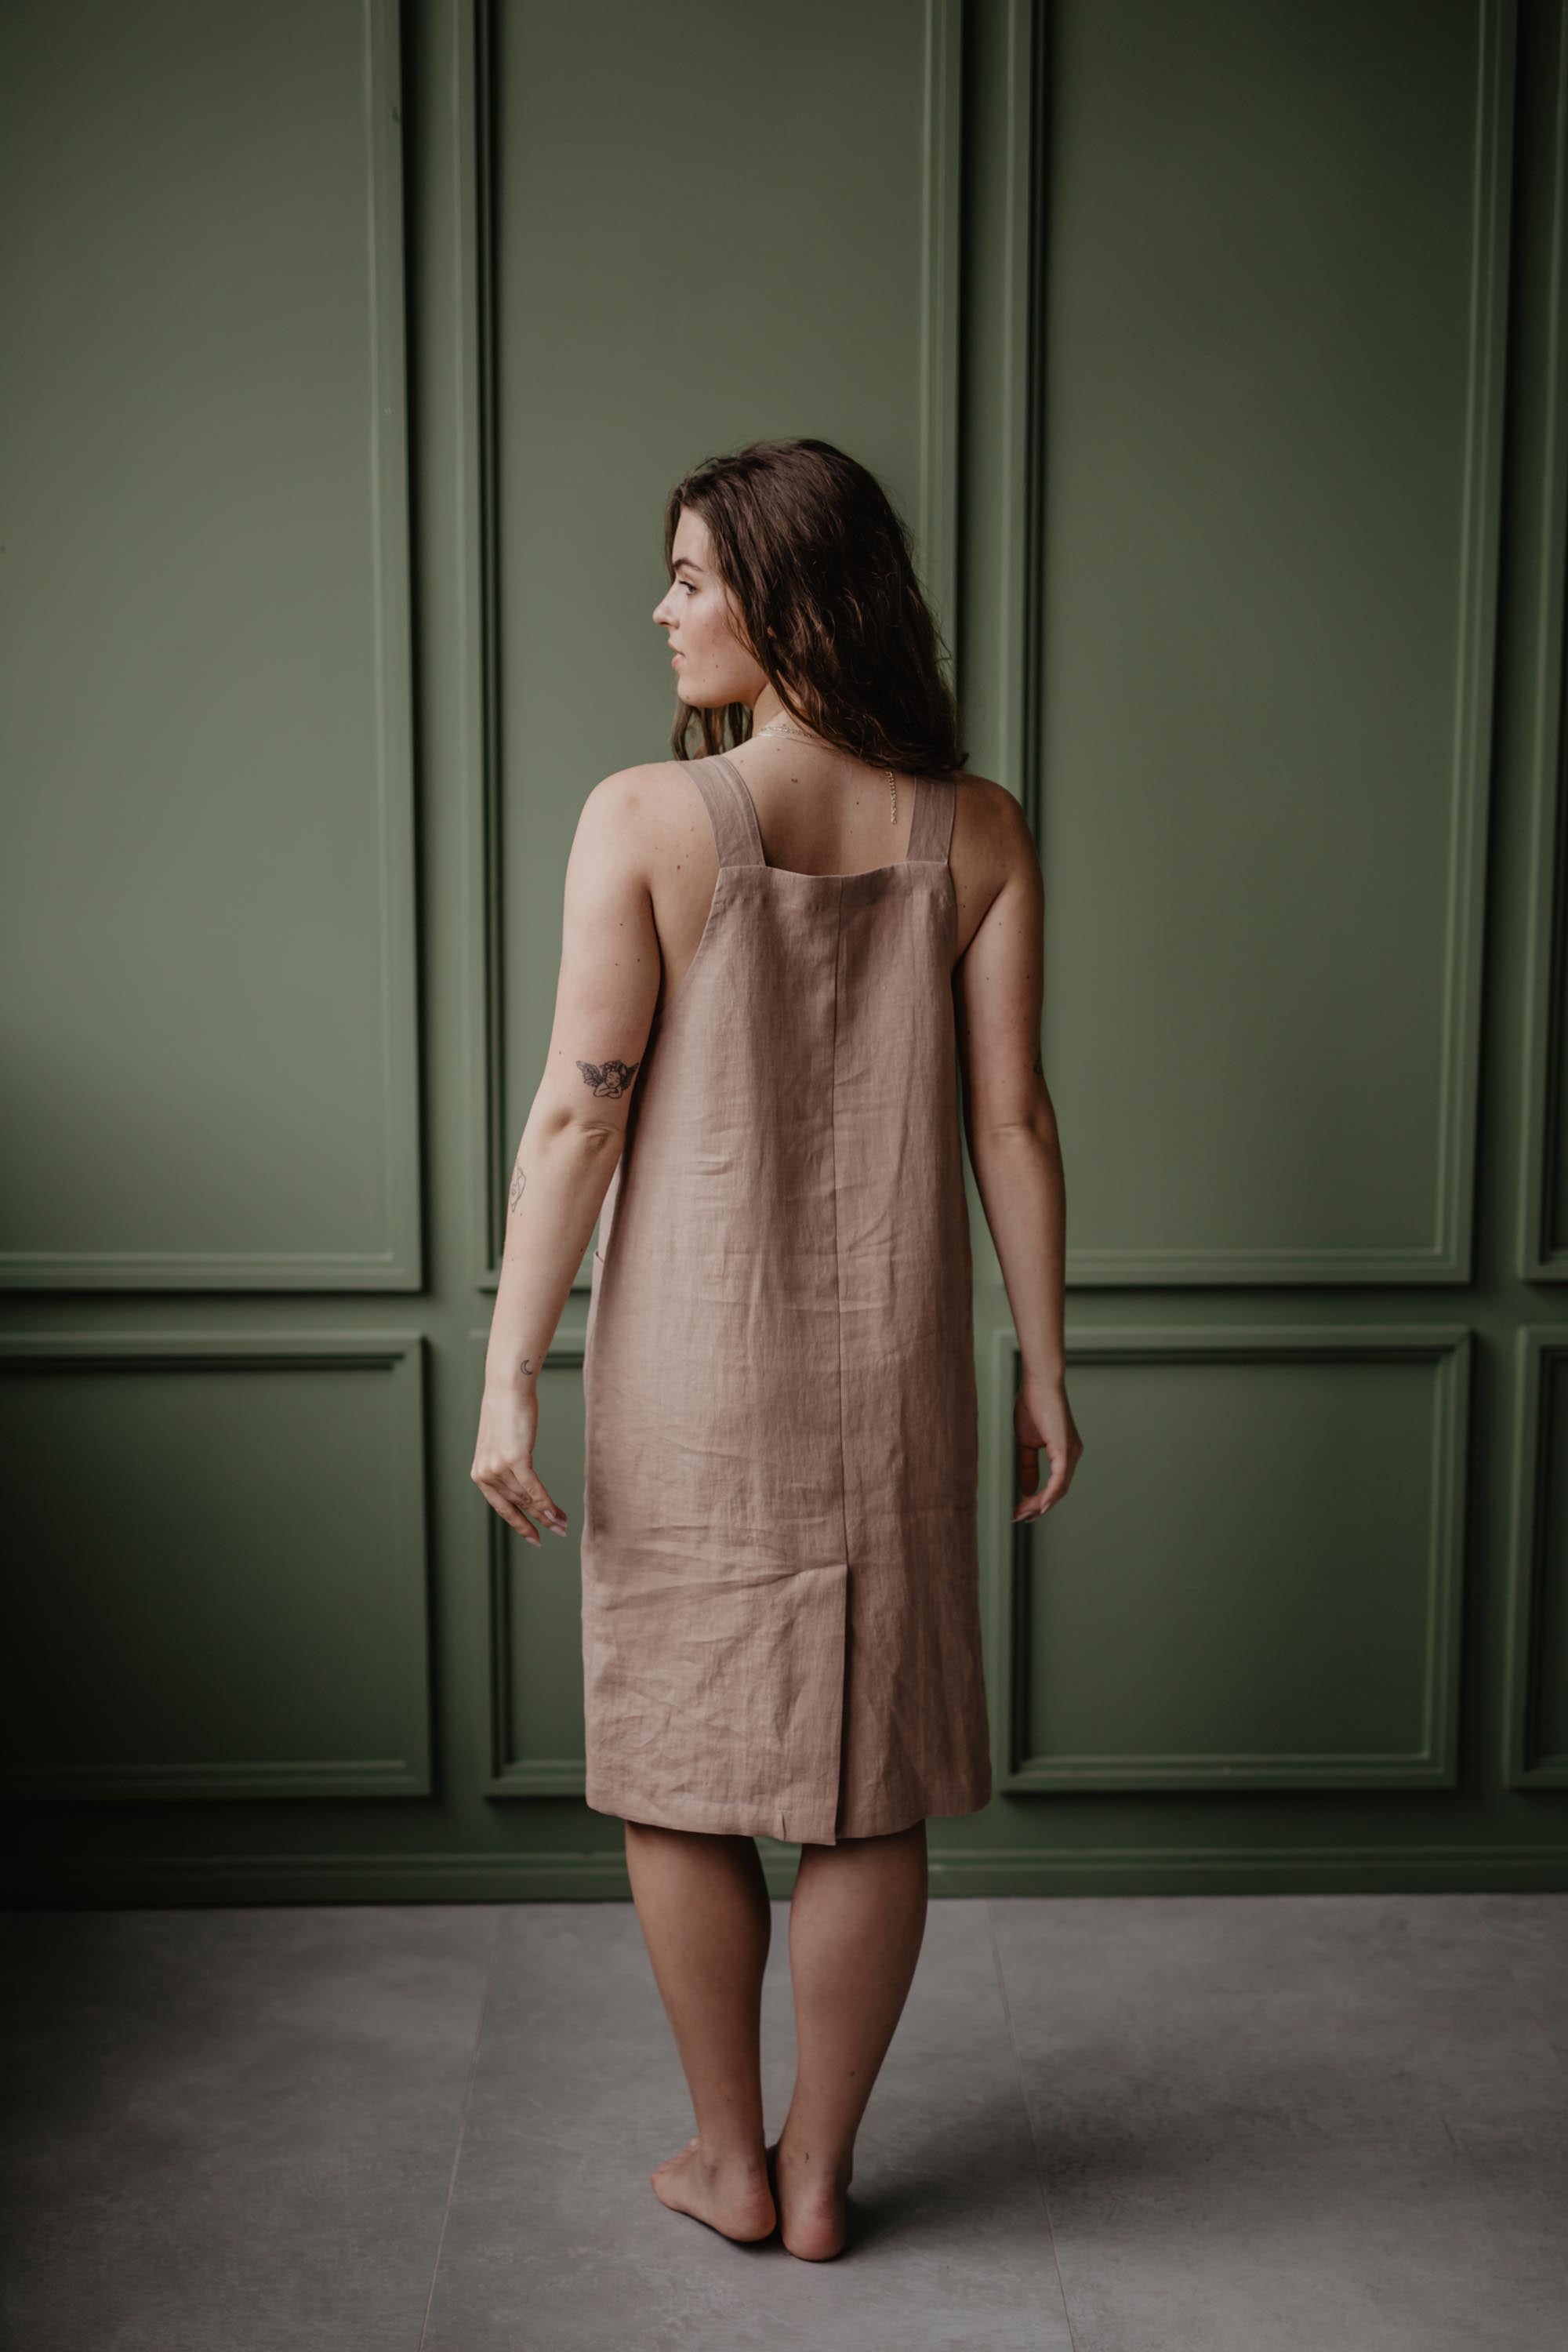 Back View Of A Women Wearing A Dusty Rose Apron Dress In A Green Room